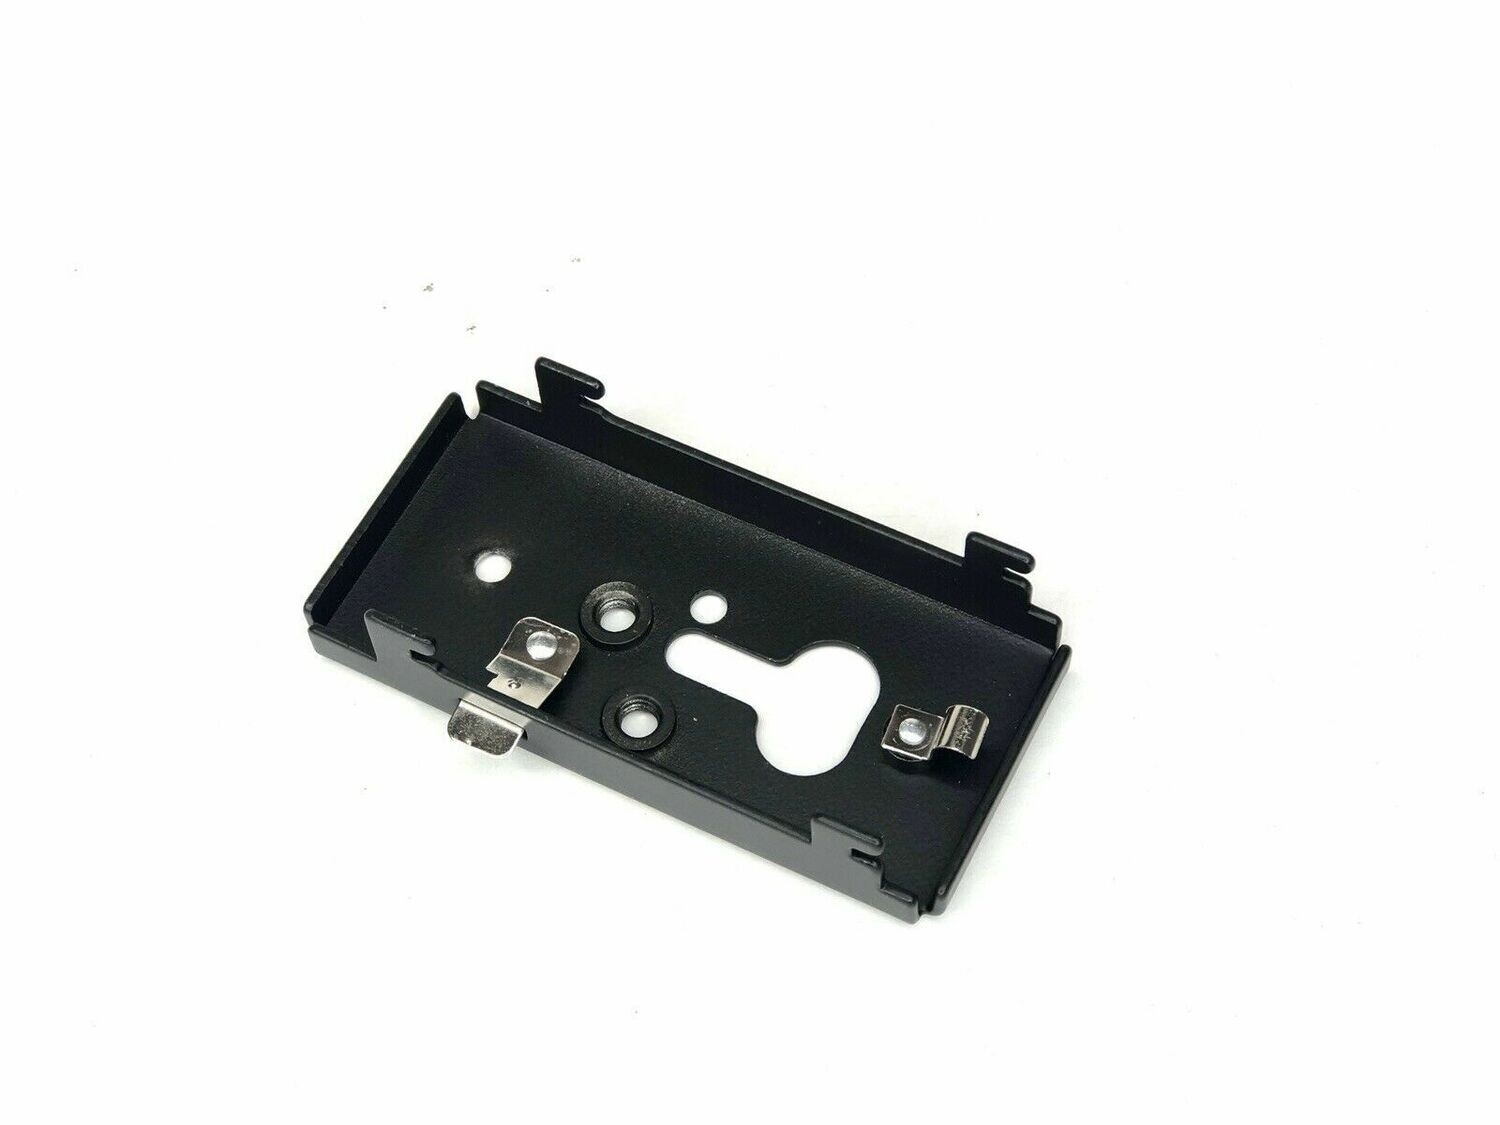 Bose UFS-20 Speaker Stand Parts - Mounting Bracket Adapter for Bose Cube Series II